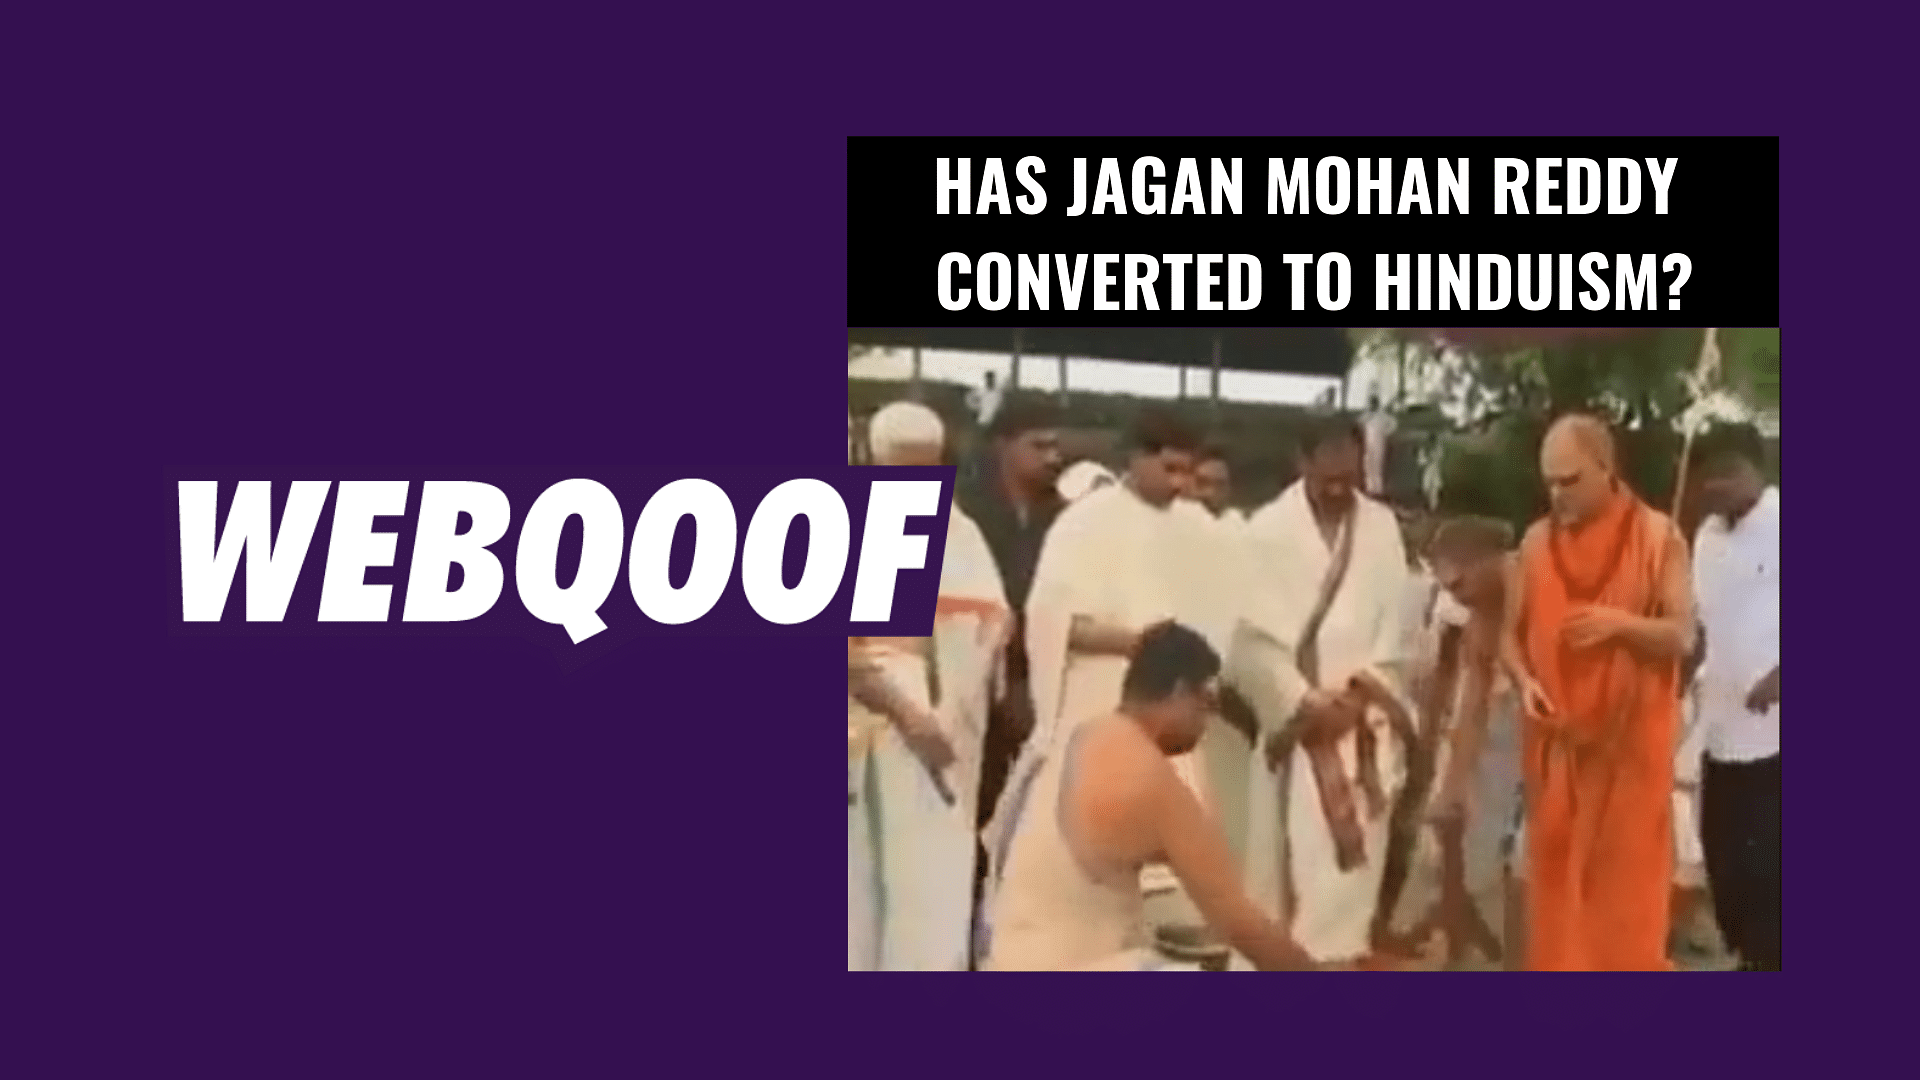 A viral video on social media falsely claimed that Jagan Mohan Reddy has converted from Christianity to Hinduism.